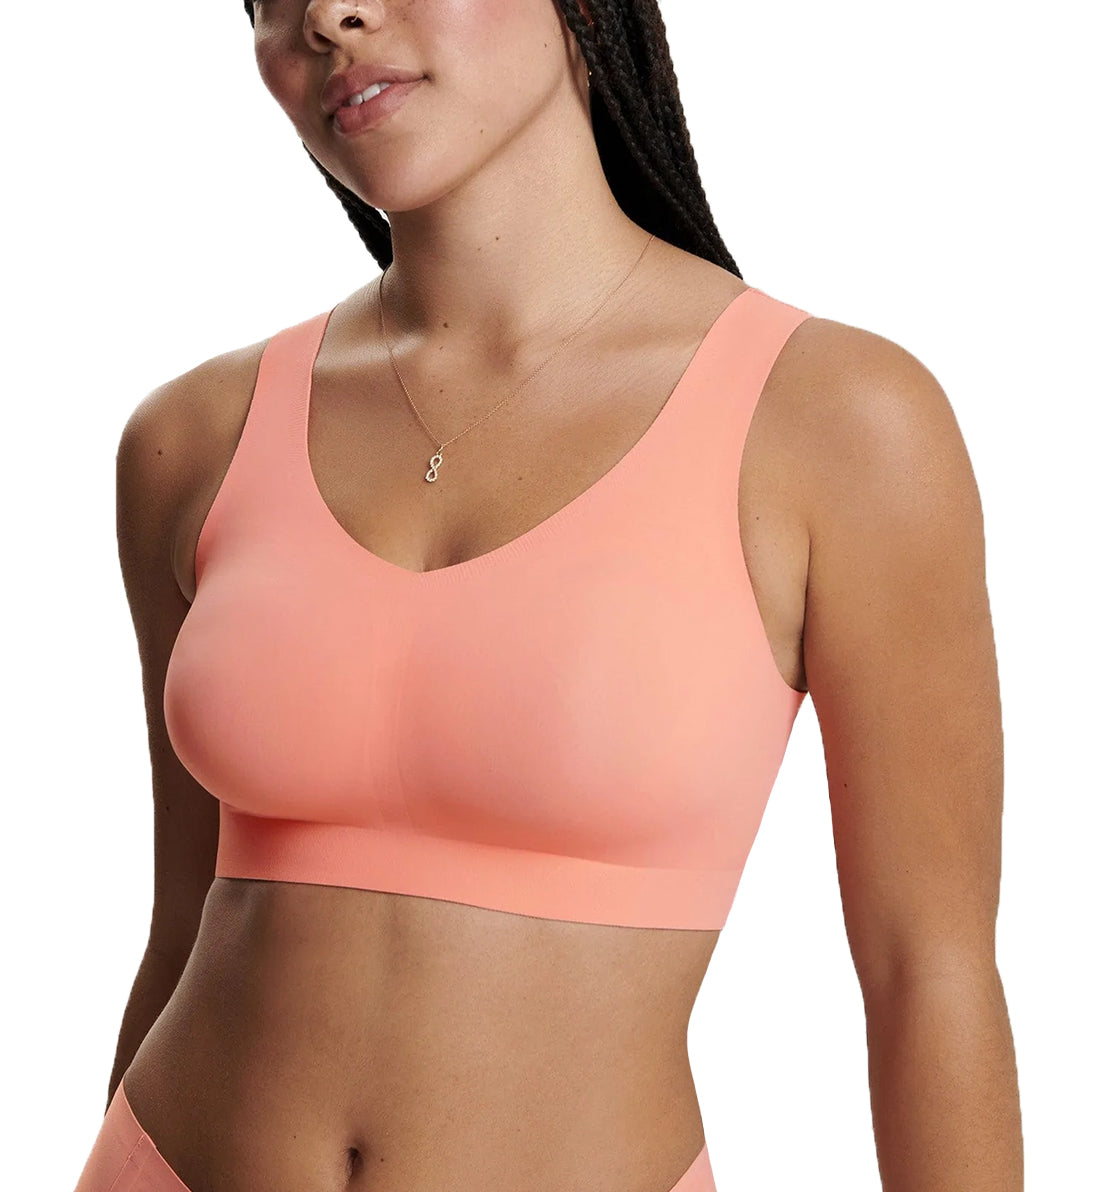 Evelyn &amp; Bobbie DEFY V-Neck Bralette w/ Removable Pads (1728),Small,Coral - Coral,Small